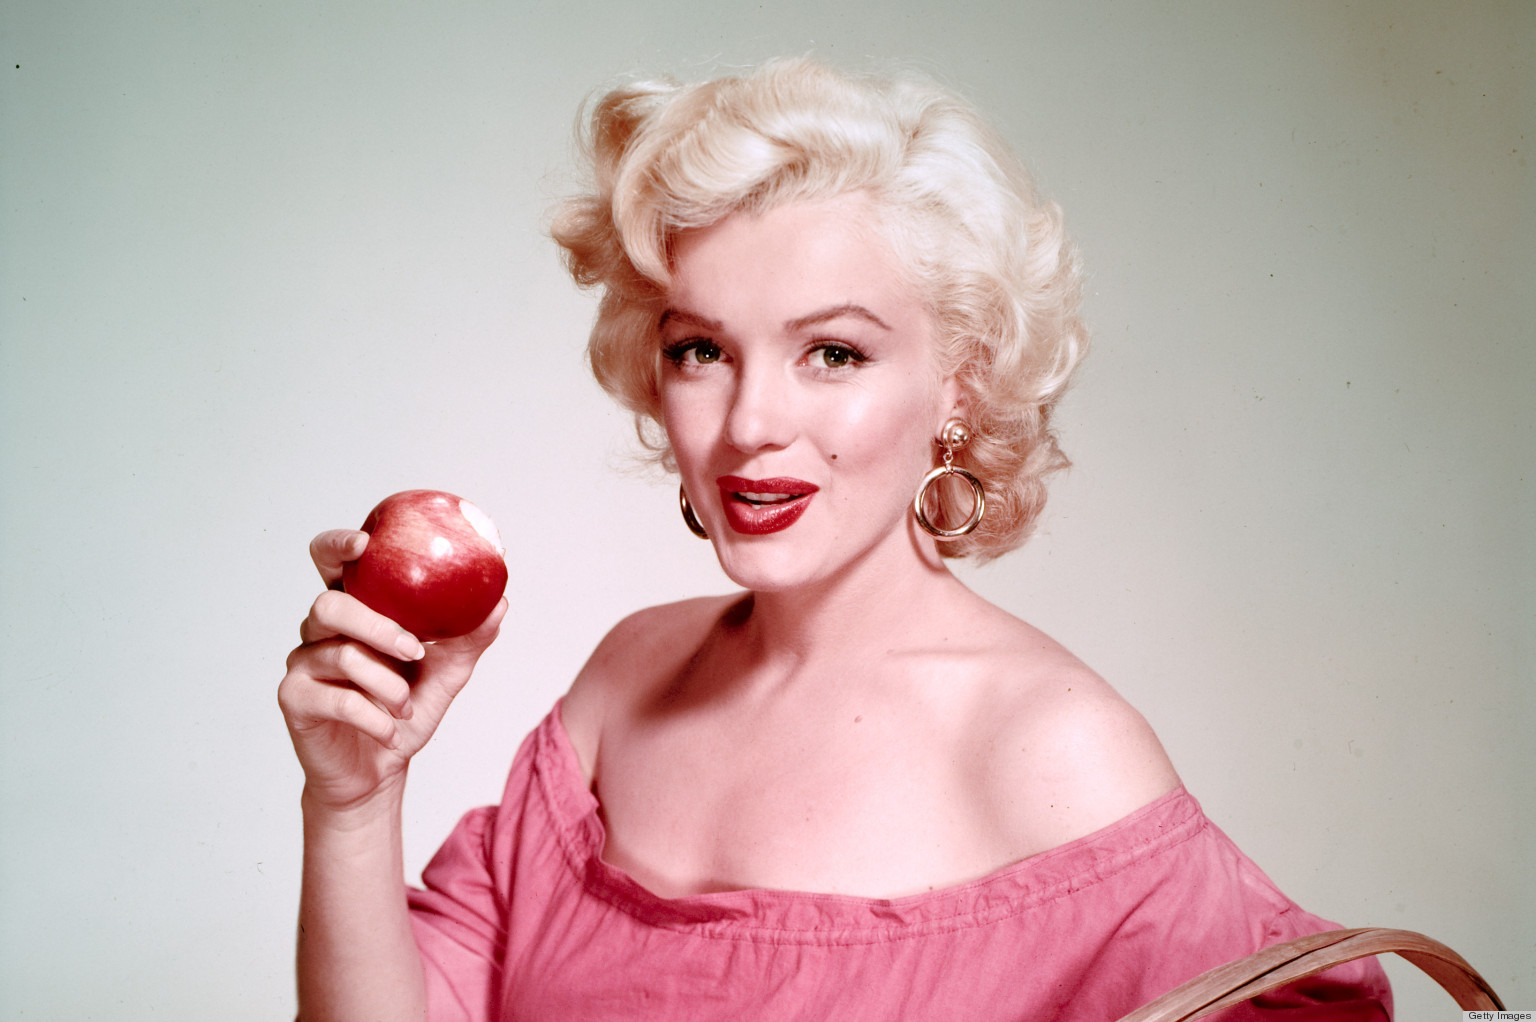 Prove You’re Actually Smart by Acing This General Knowledge Quiz Marilyn Monroe